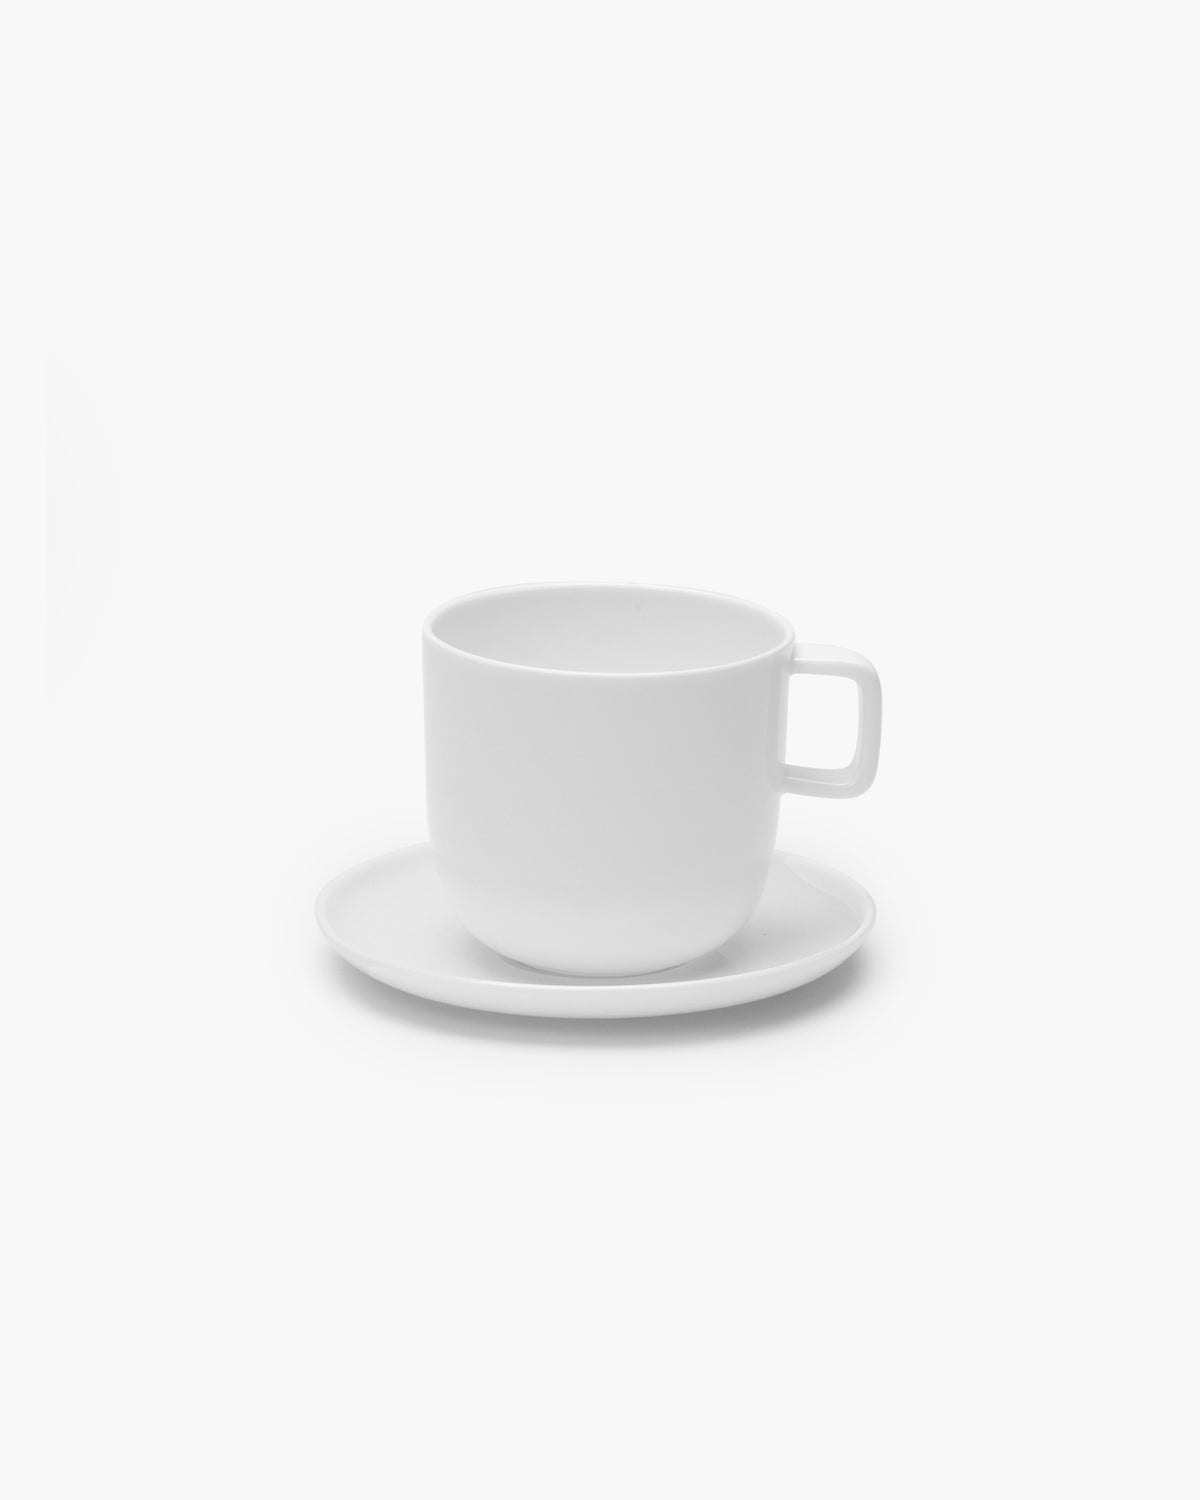 Piet Boon Coffee Cup and Saucer